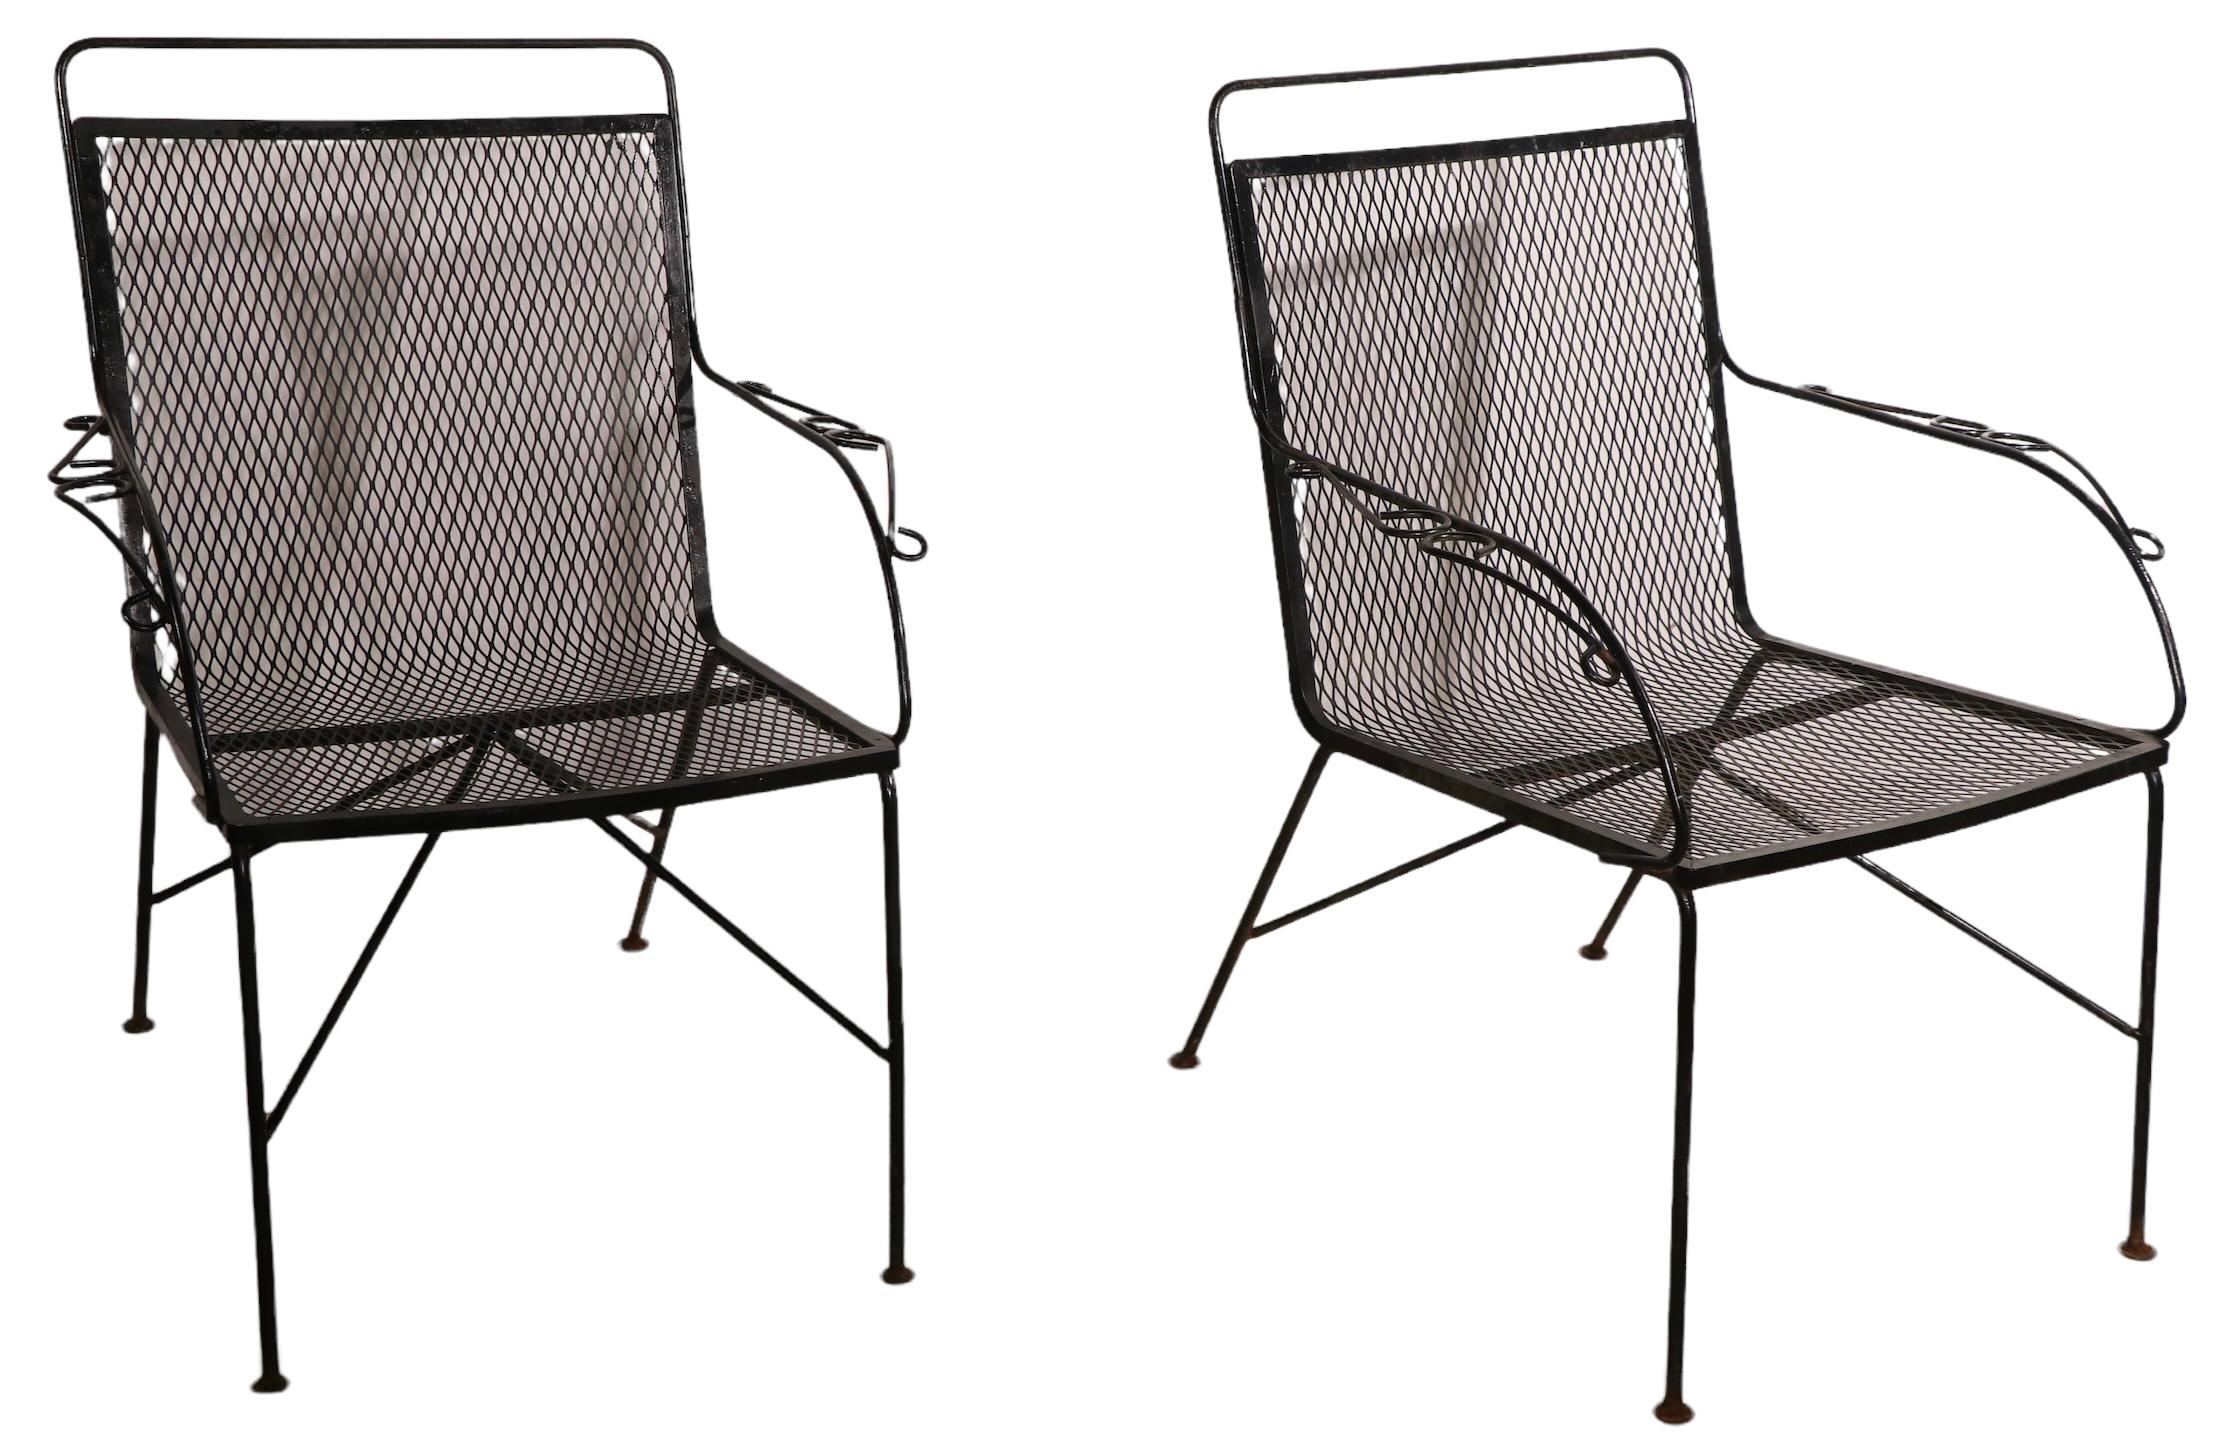 Pair of mid-century garden, patio, poolside chairs constructed of wrought iron and metal mesh. These can function as dinning, or lounge chairs, both are in good, original condition, showing only light cosmetic wear, normal and consistent with age.